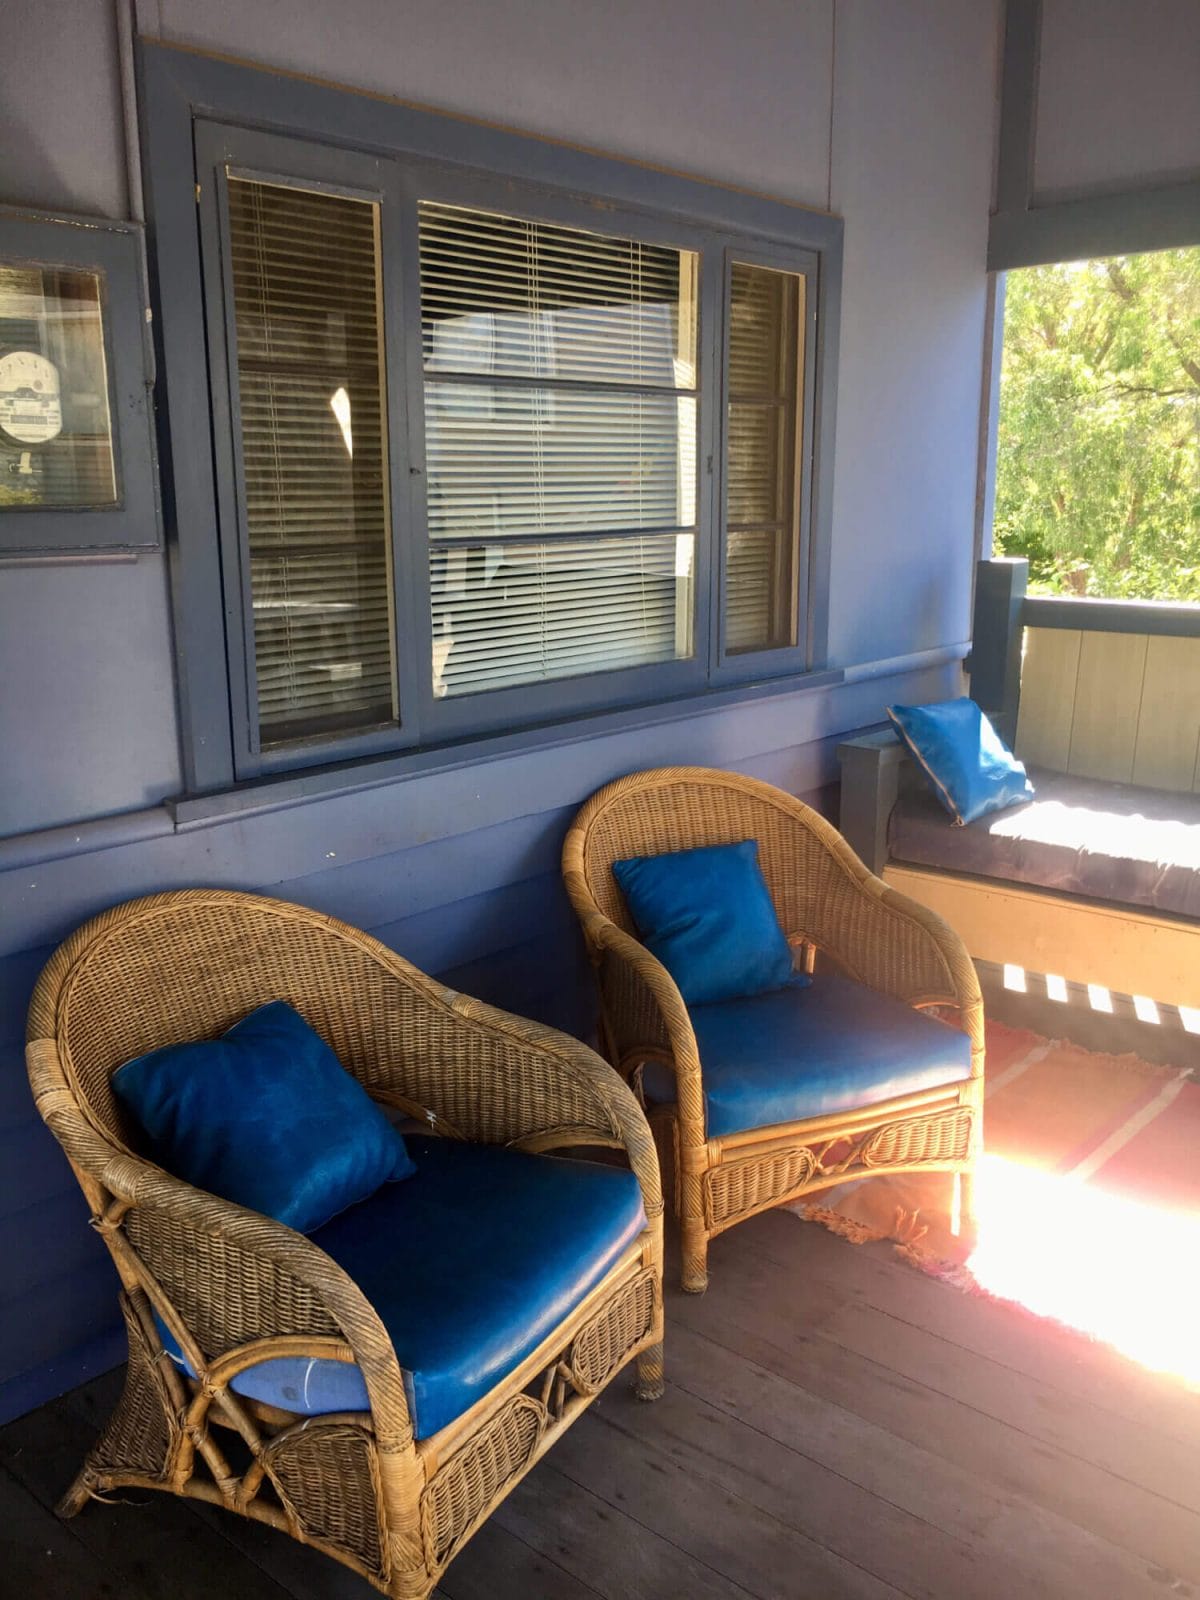 Weekender - Accommodation in Bremer Bay - 21 Barbara Street. Outdoor cane chairs and lounge area near BBQ